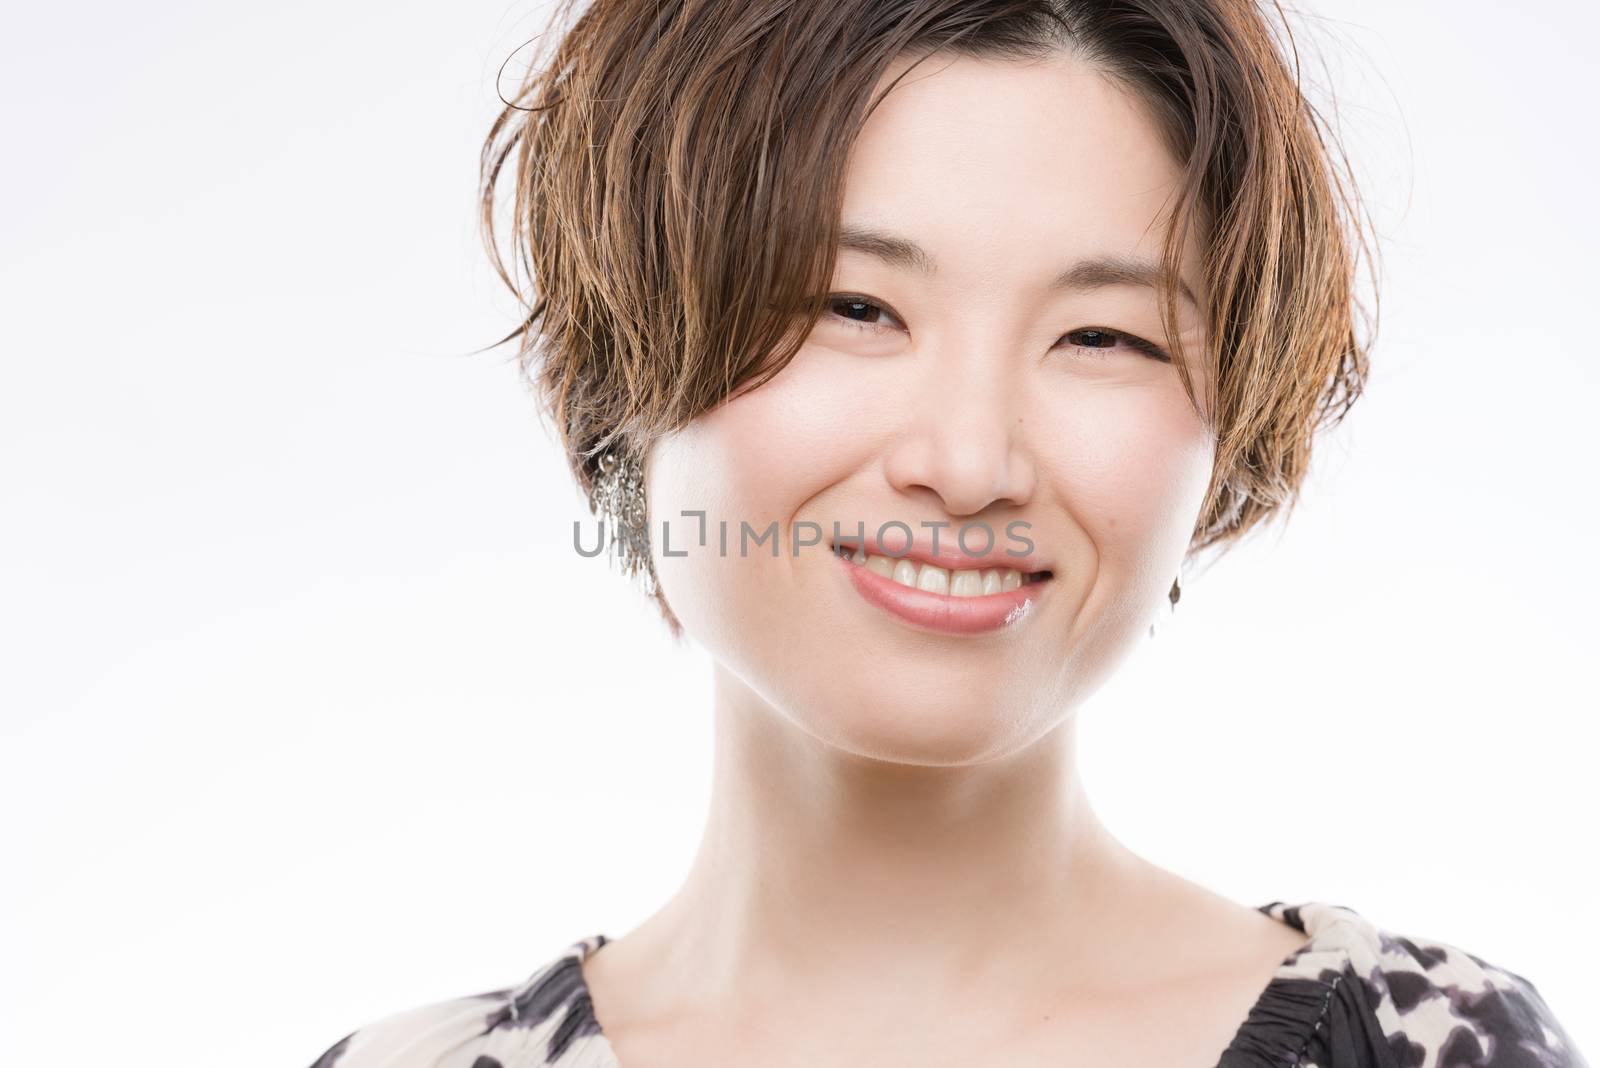 Bright Smiling Japanese Woman Portrait by justtscott